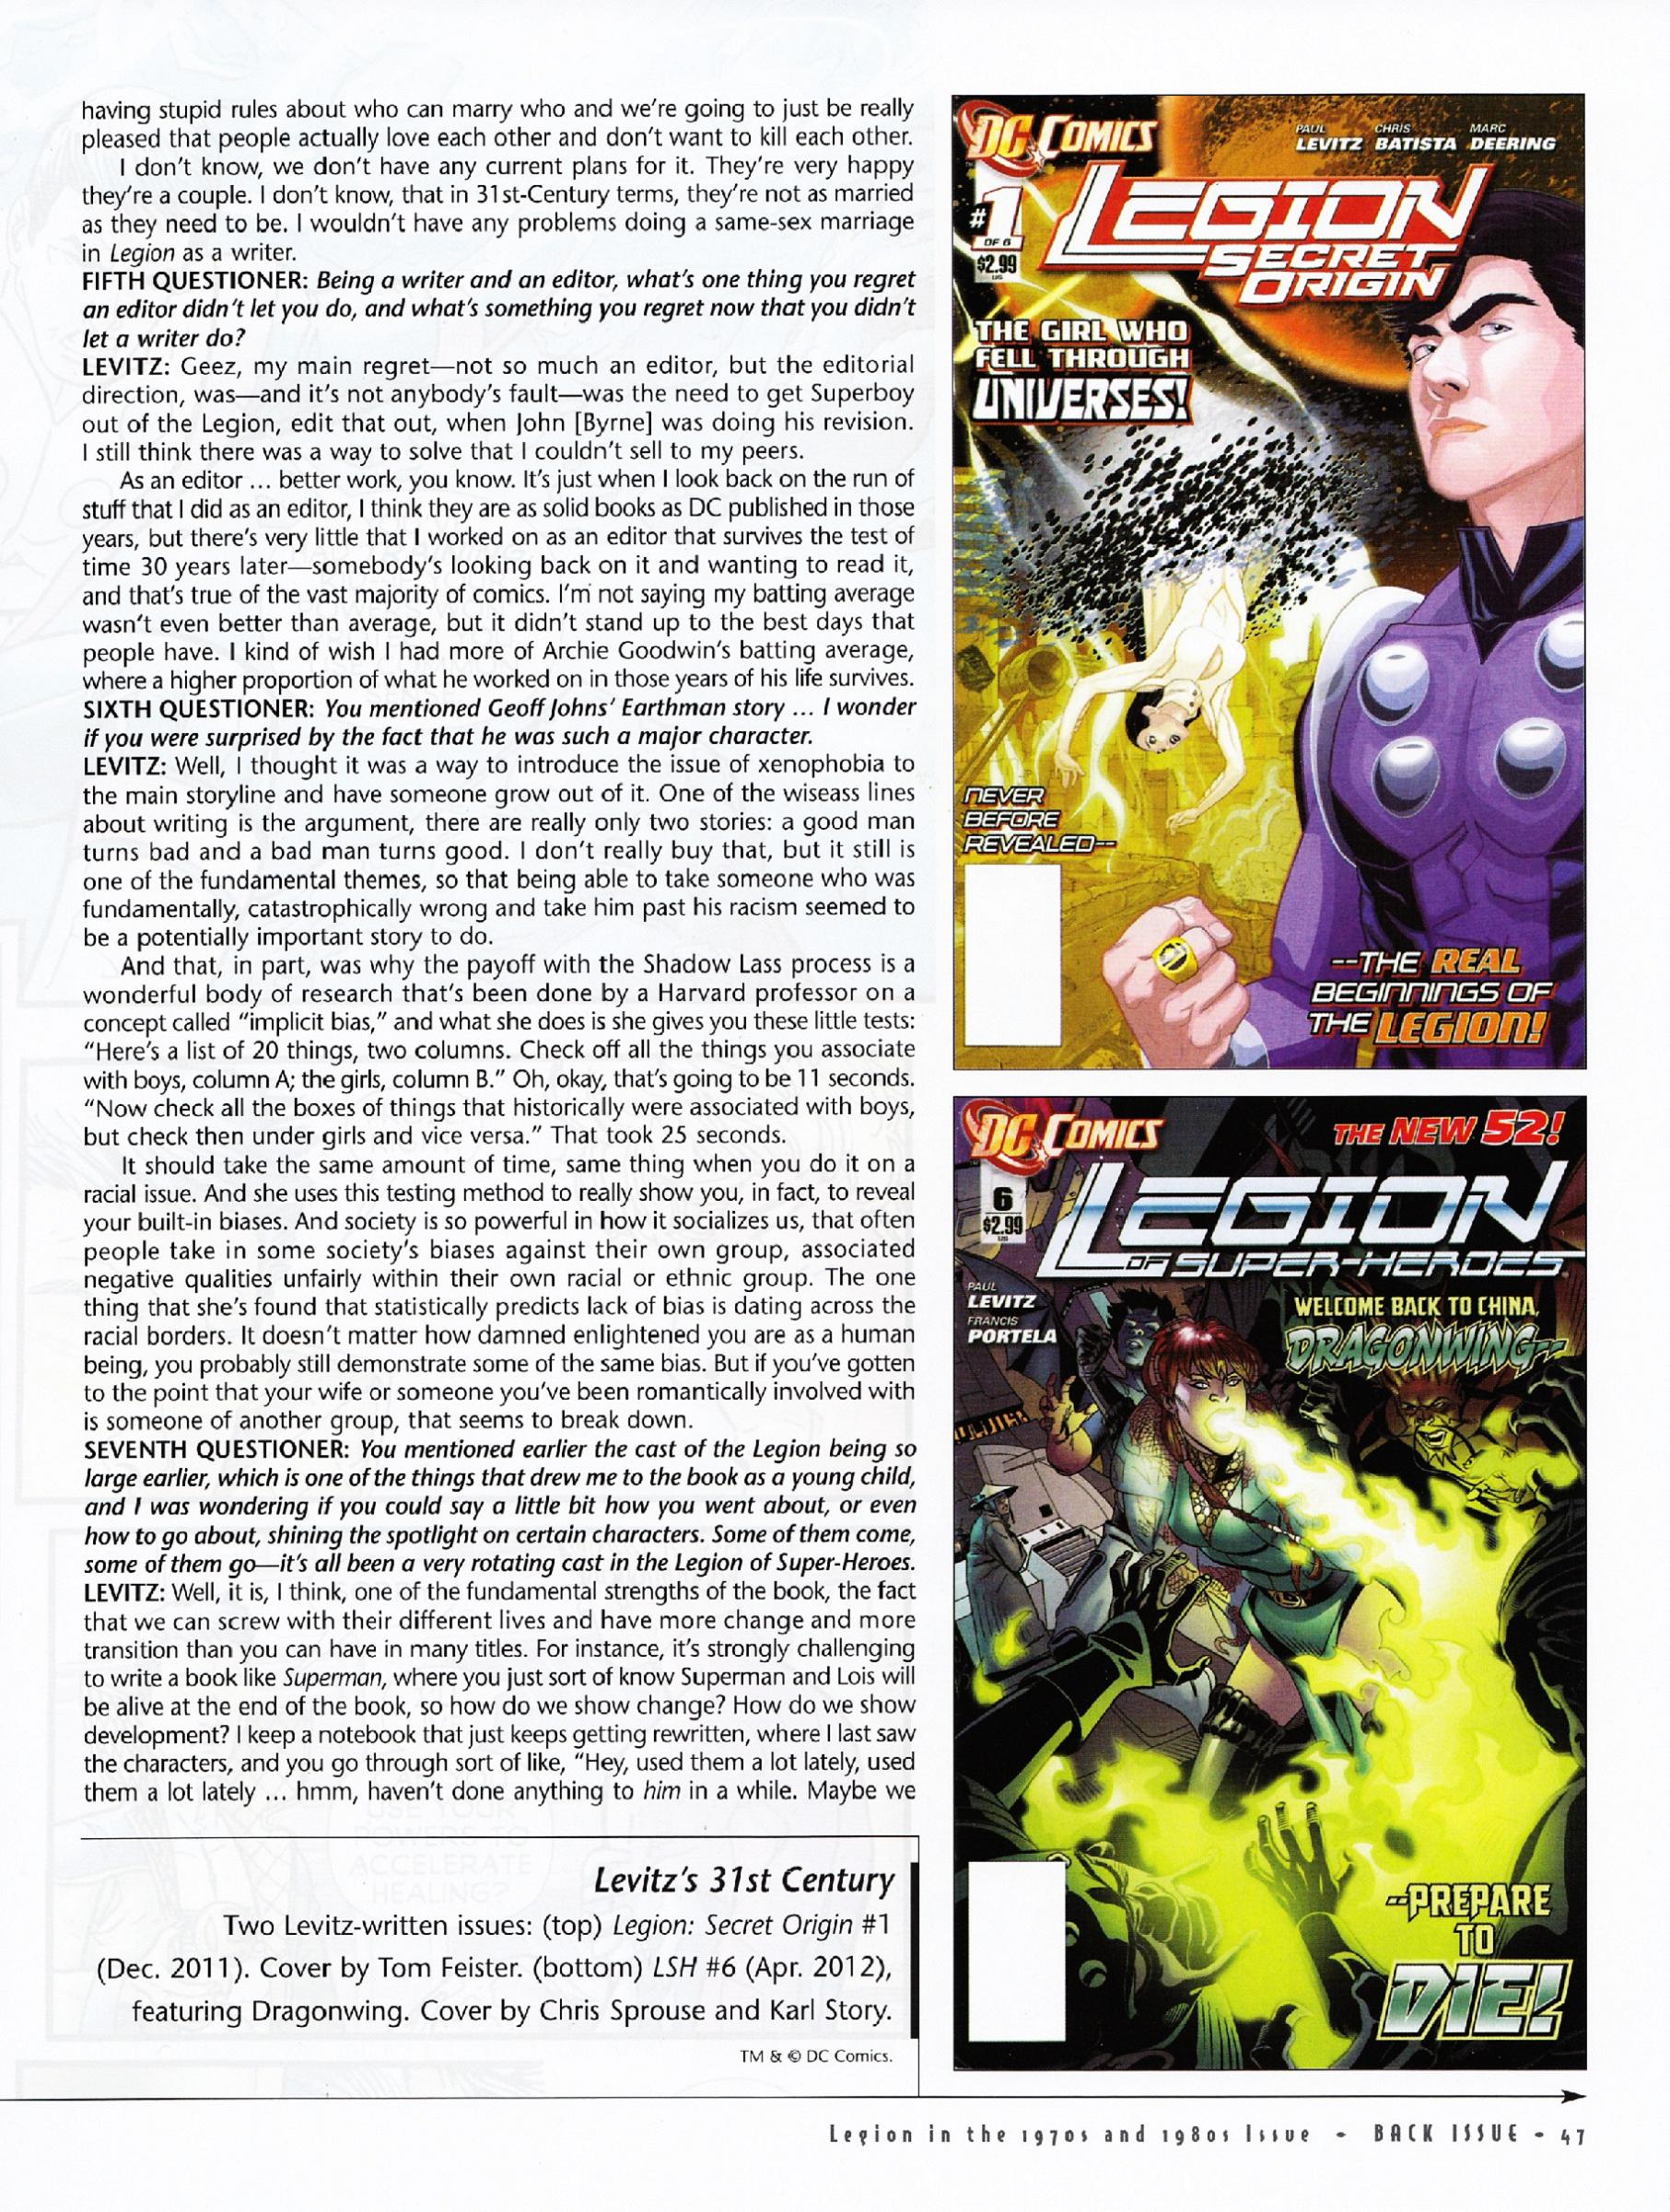 Read online Back Issue comic -  Issue #68 - 49